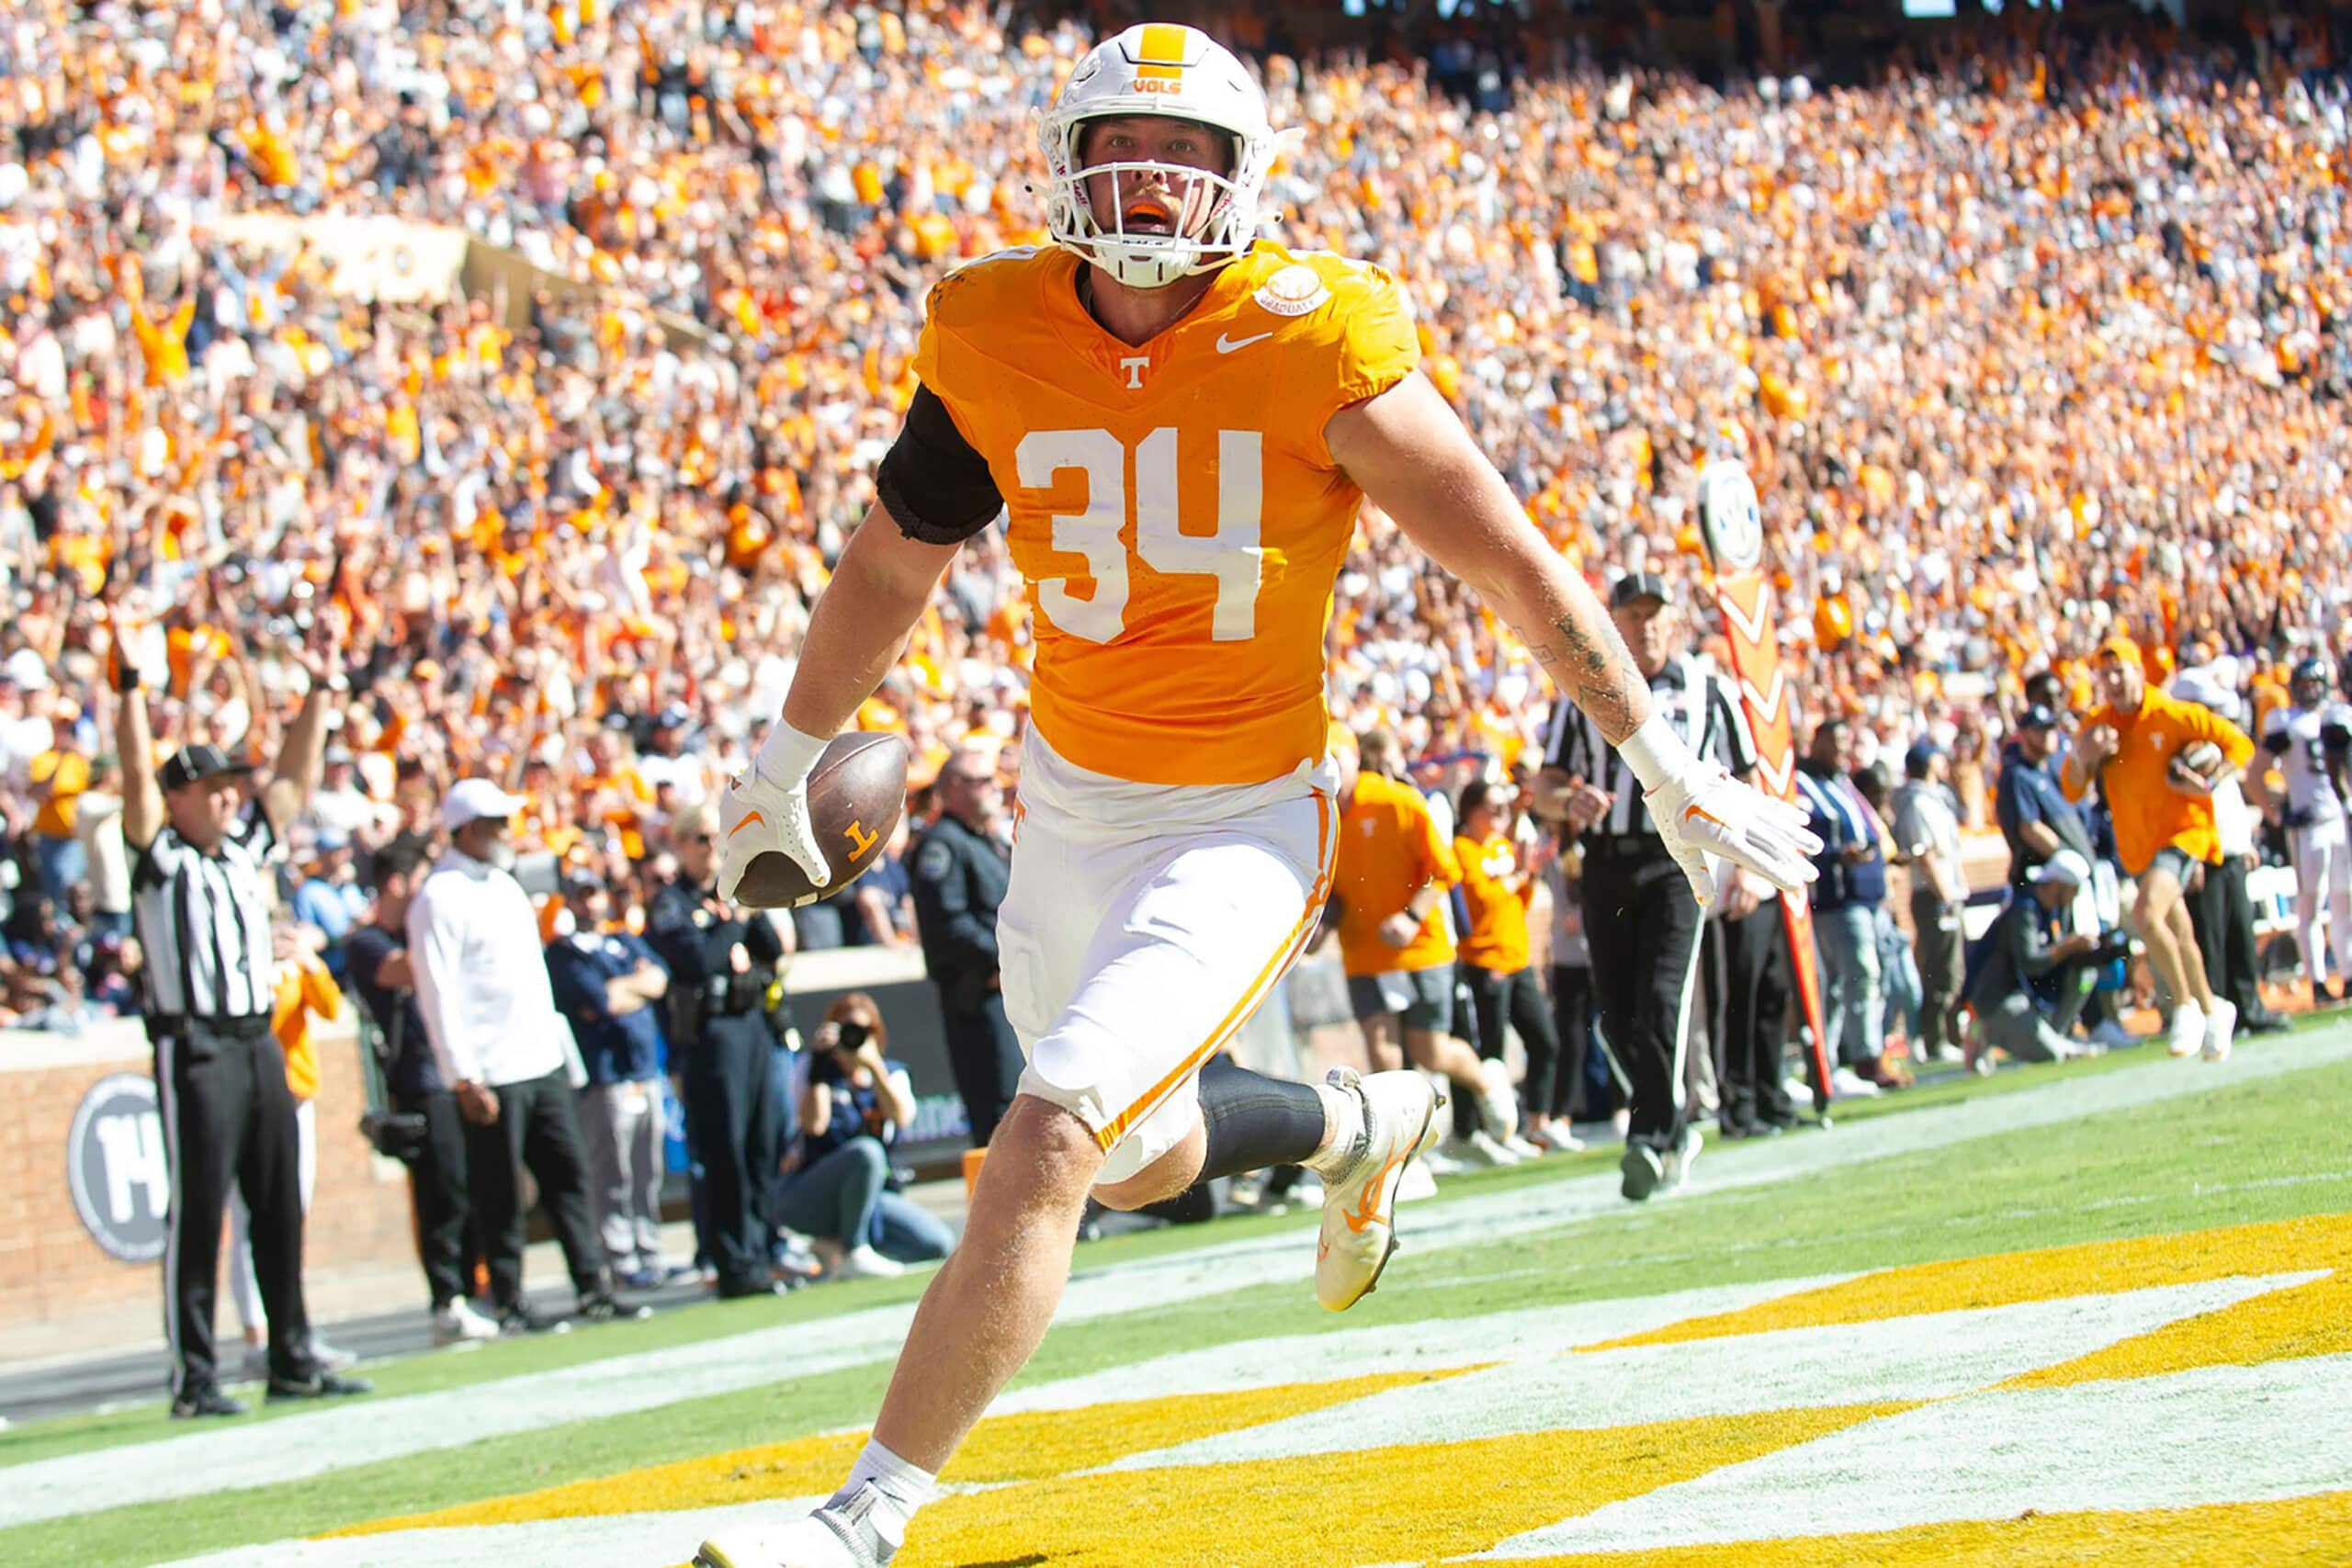 Tennessee tight end McCallan Castles (34) scores a touchdown during the NCAA college football game between Connecticut and Tennessee on Saturday, November 4, 2023 in Knoxville, Tenn.